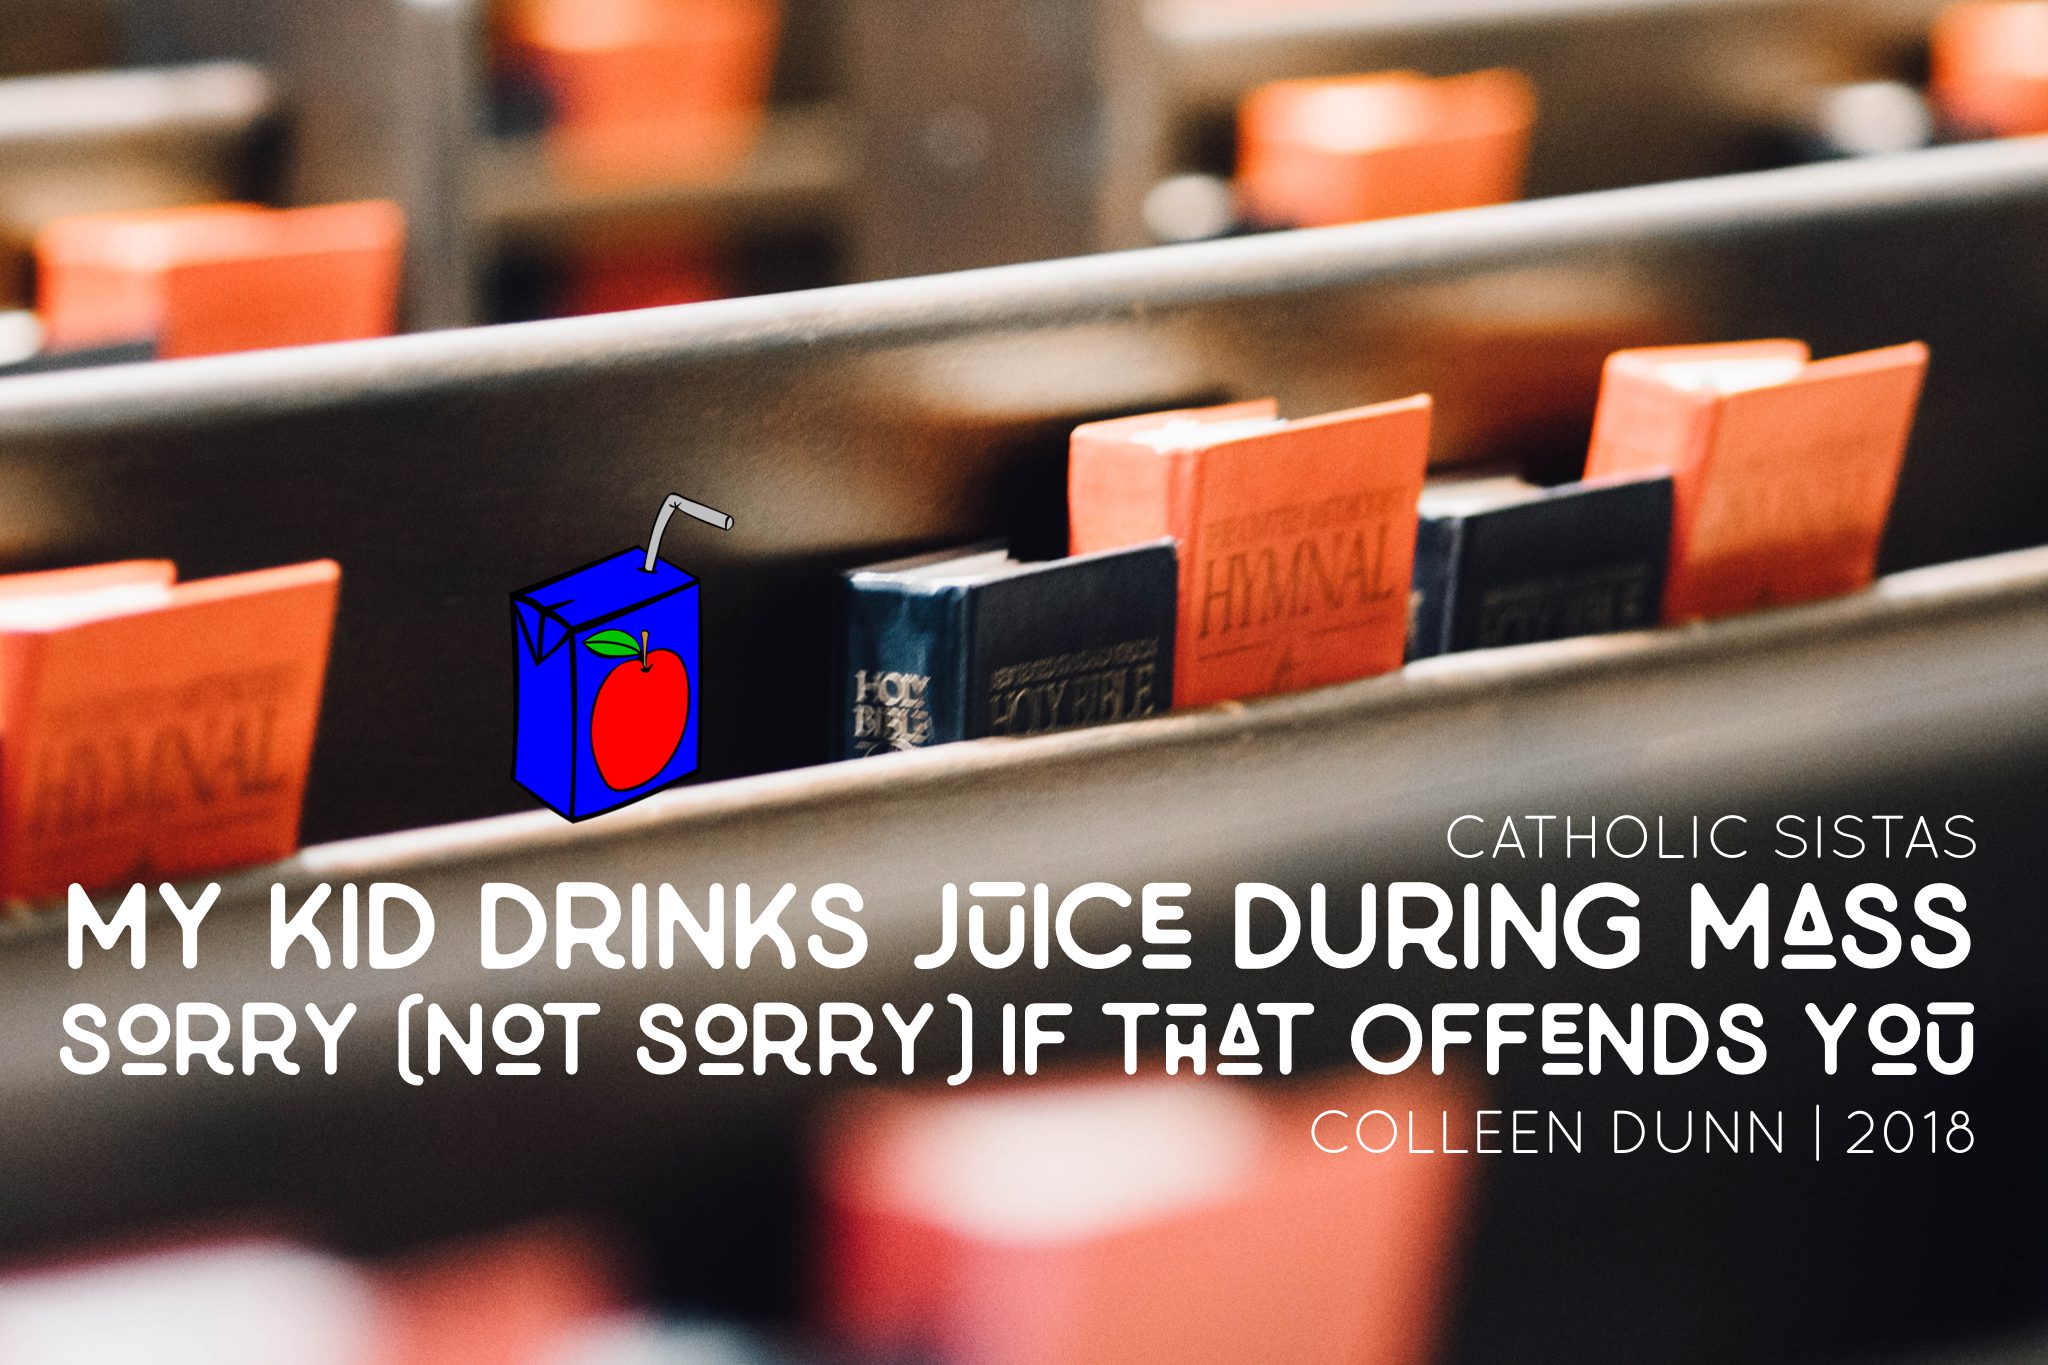 My Kid Drinks Juice in Mass - Sorry (Not Sorry) If That Offends You.